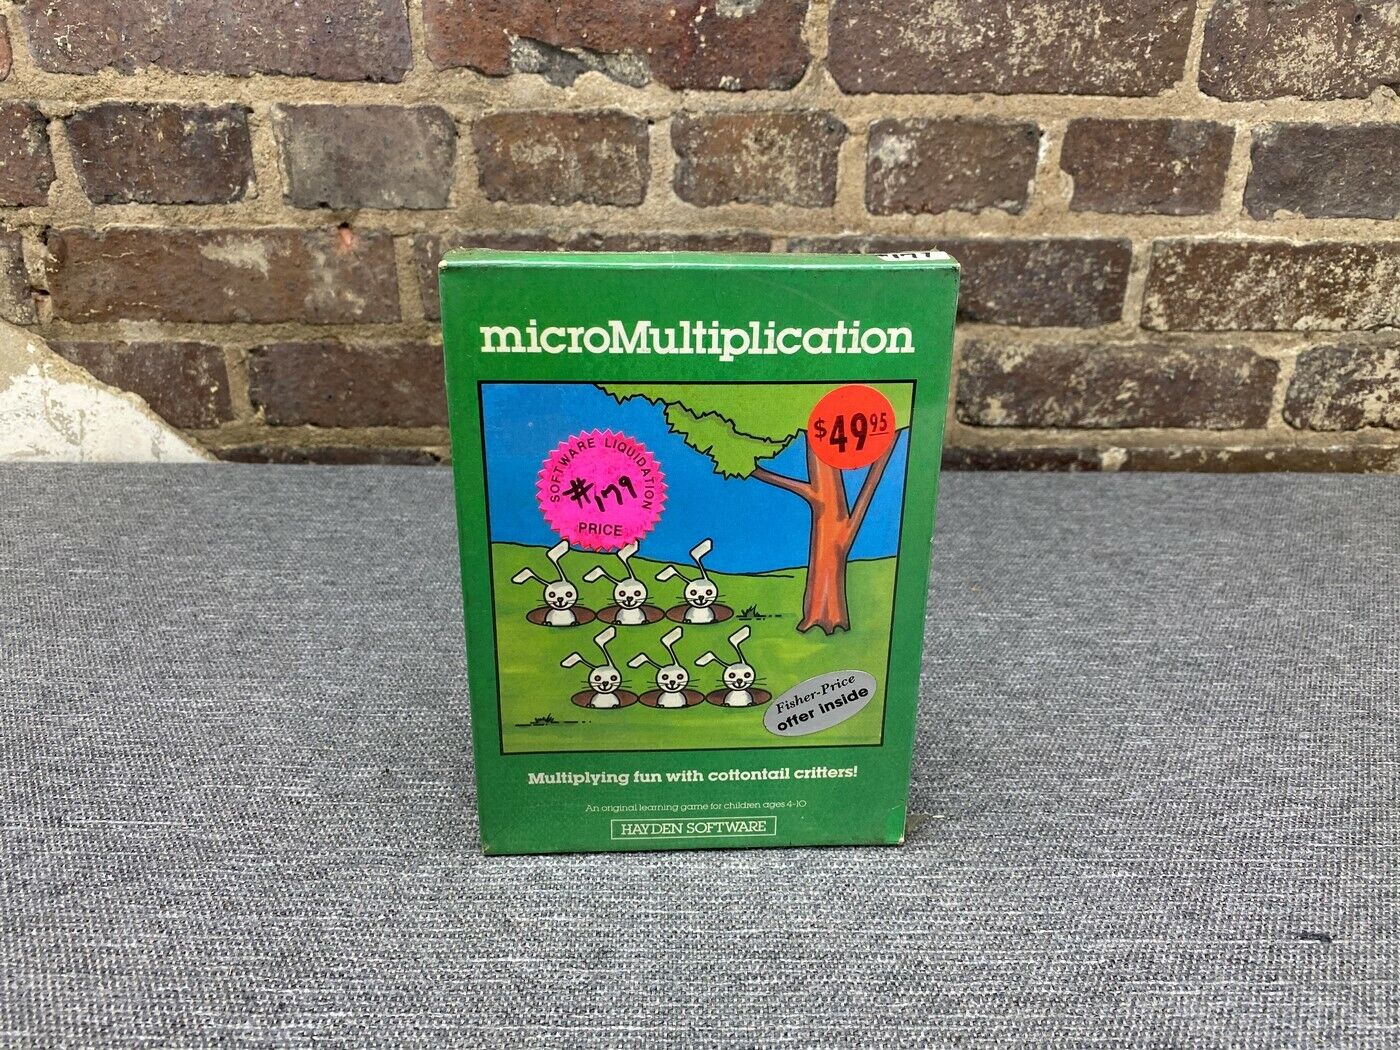 microMultiplication (Commodore 64/128, 1983) | Hayden Software 